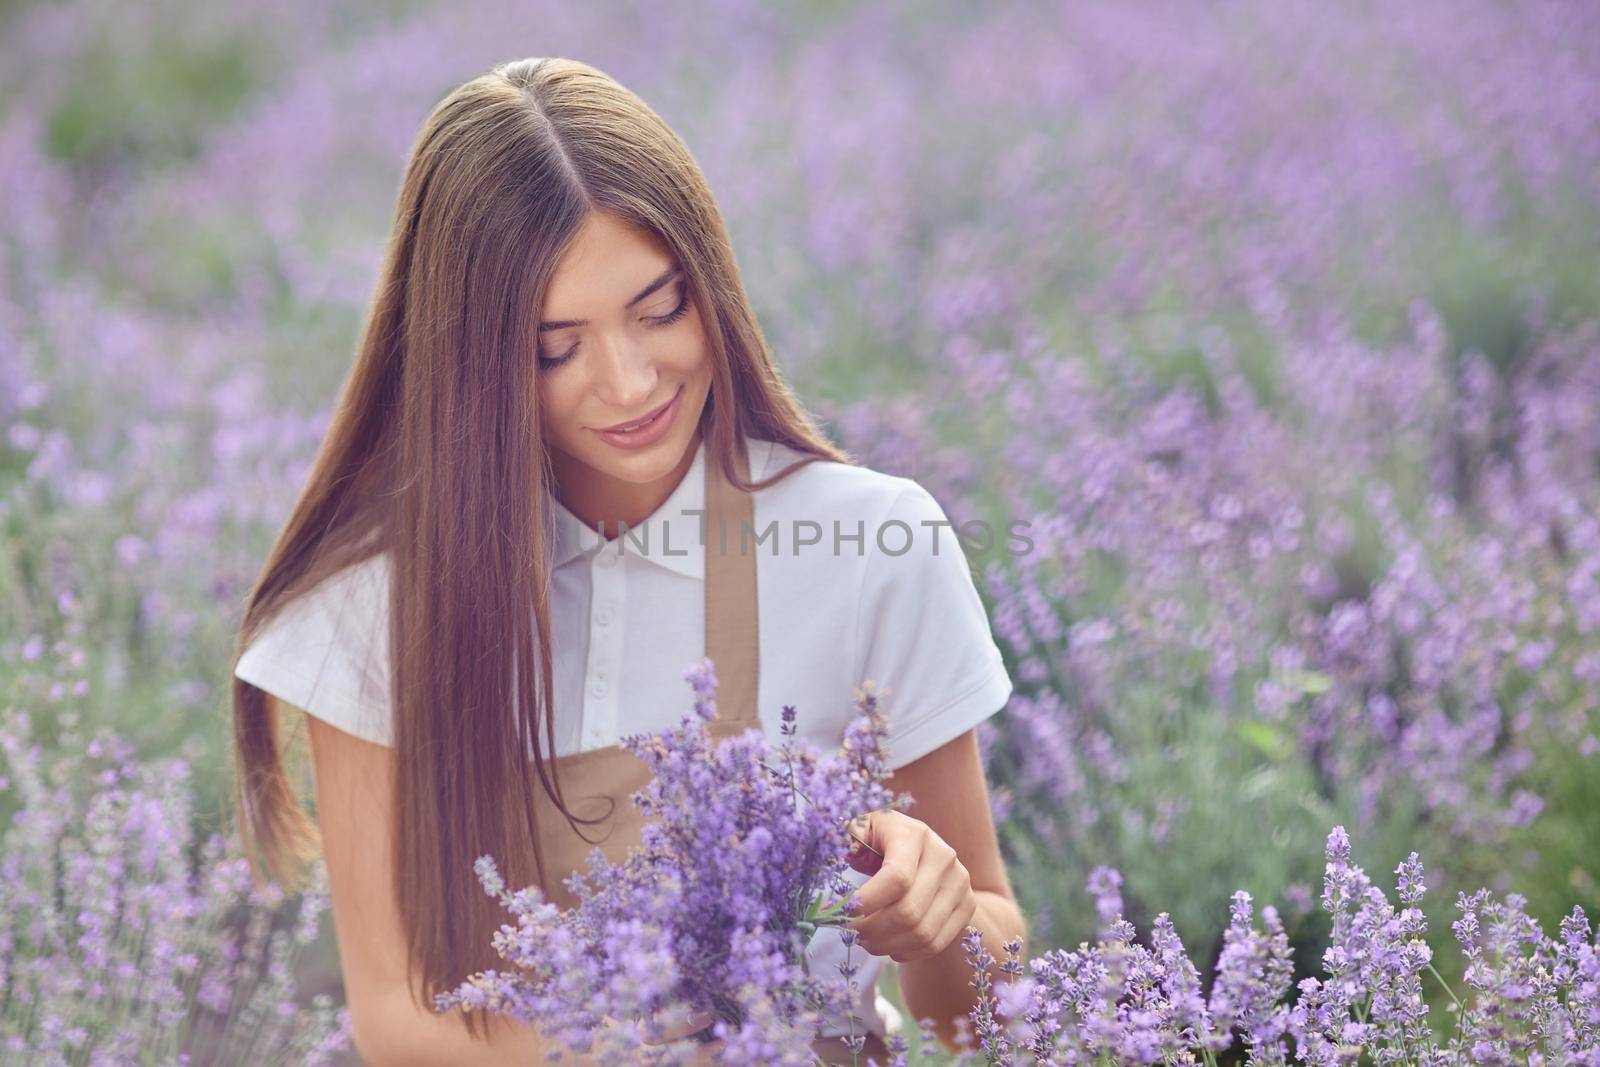 Front view of young caucasian female farmer gently taking purple aromatic flowers in endless lavender field. Happy smiling gorgeous woman collecting fresh summer harvest outdoors, warm sunshine.